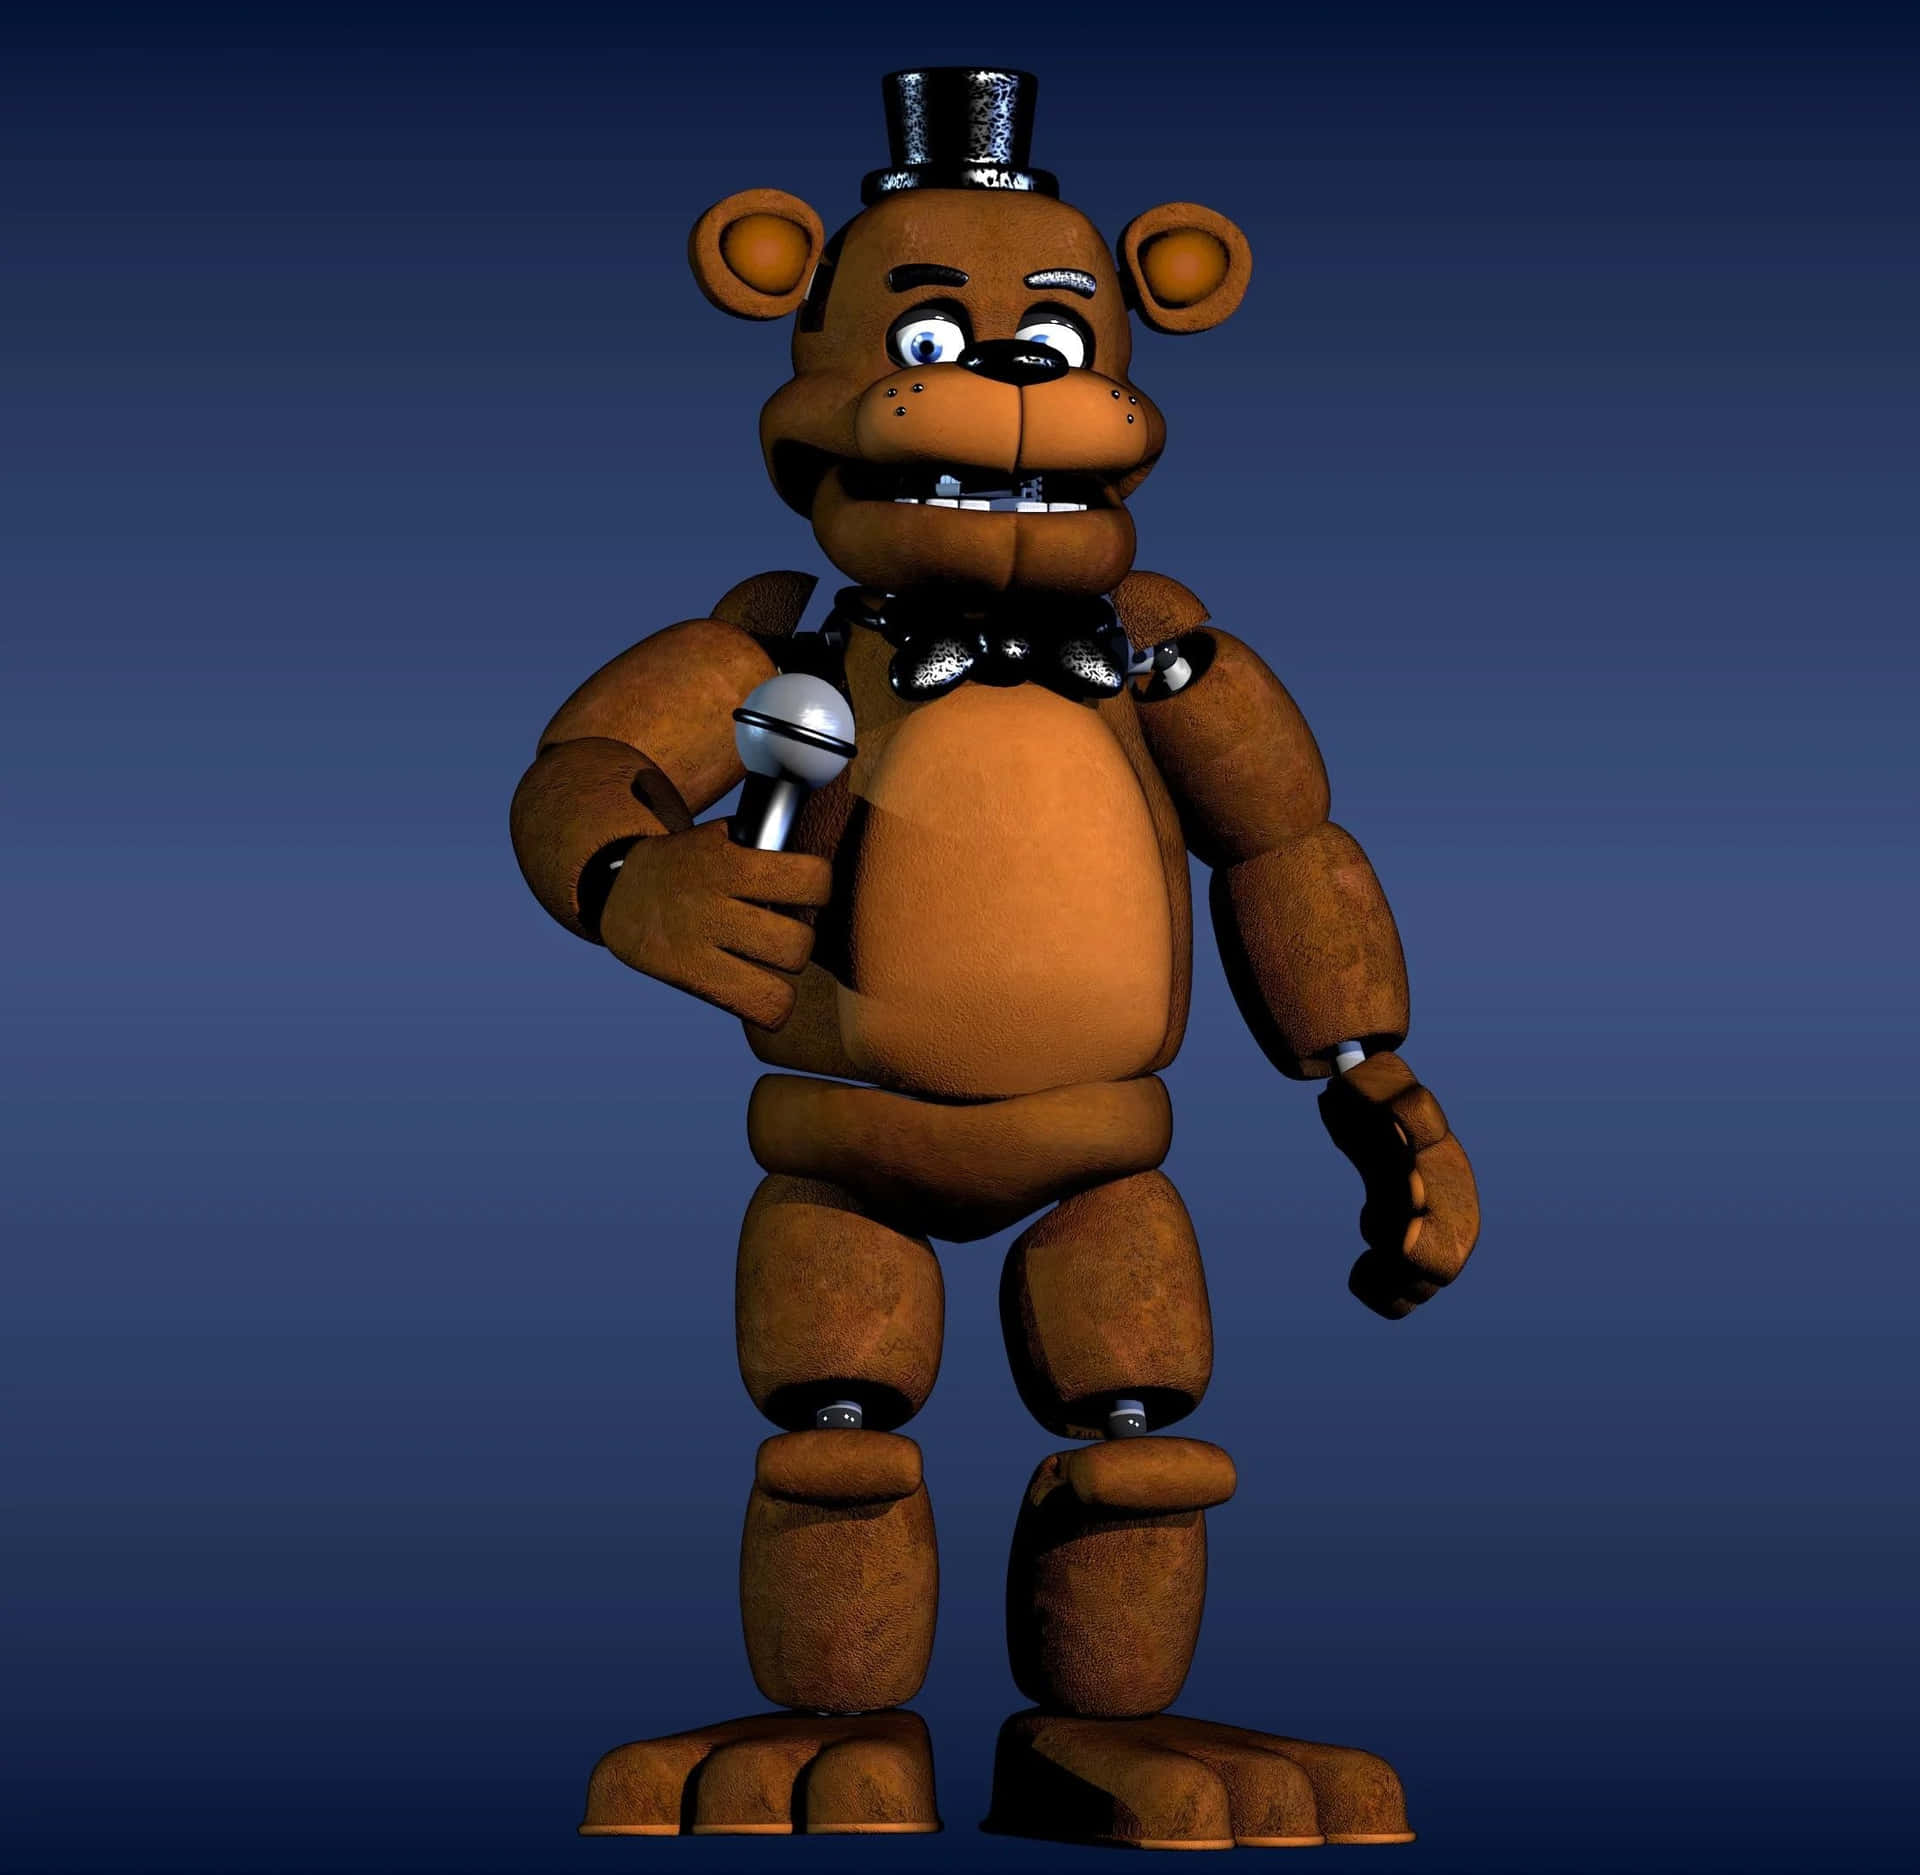 A 3d Image Of A Five Nights At Freddy's Character